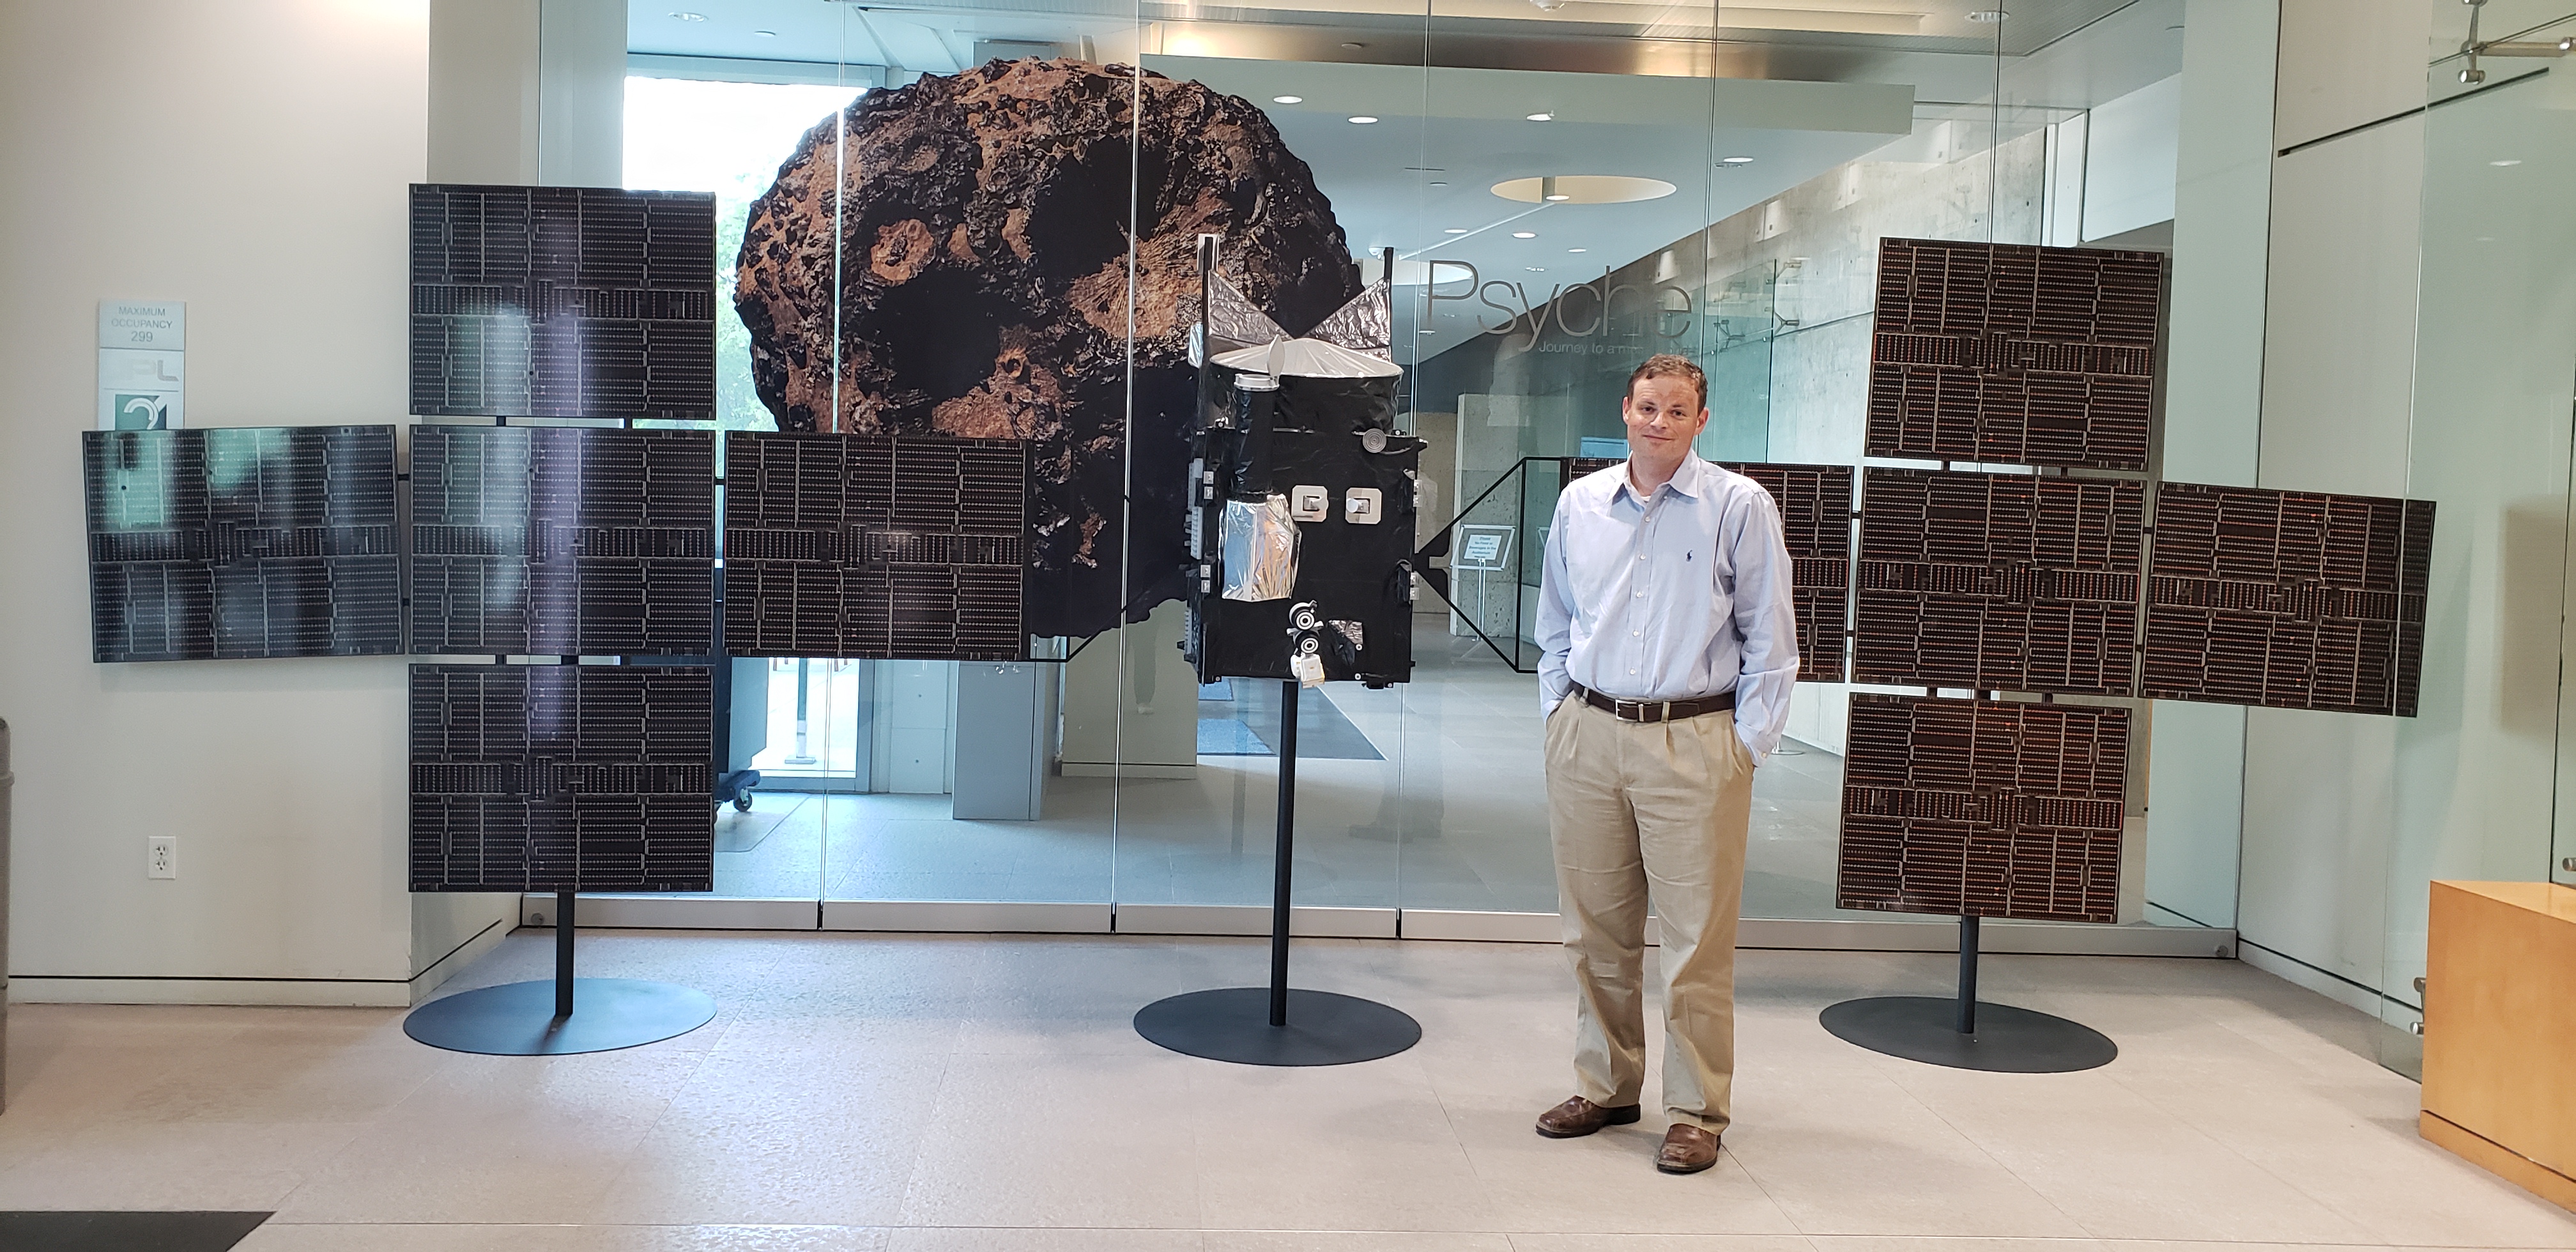 Man standing in front of a spacecraft model